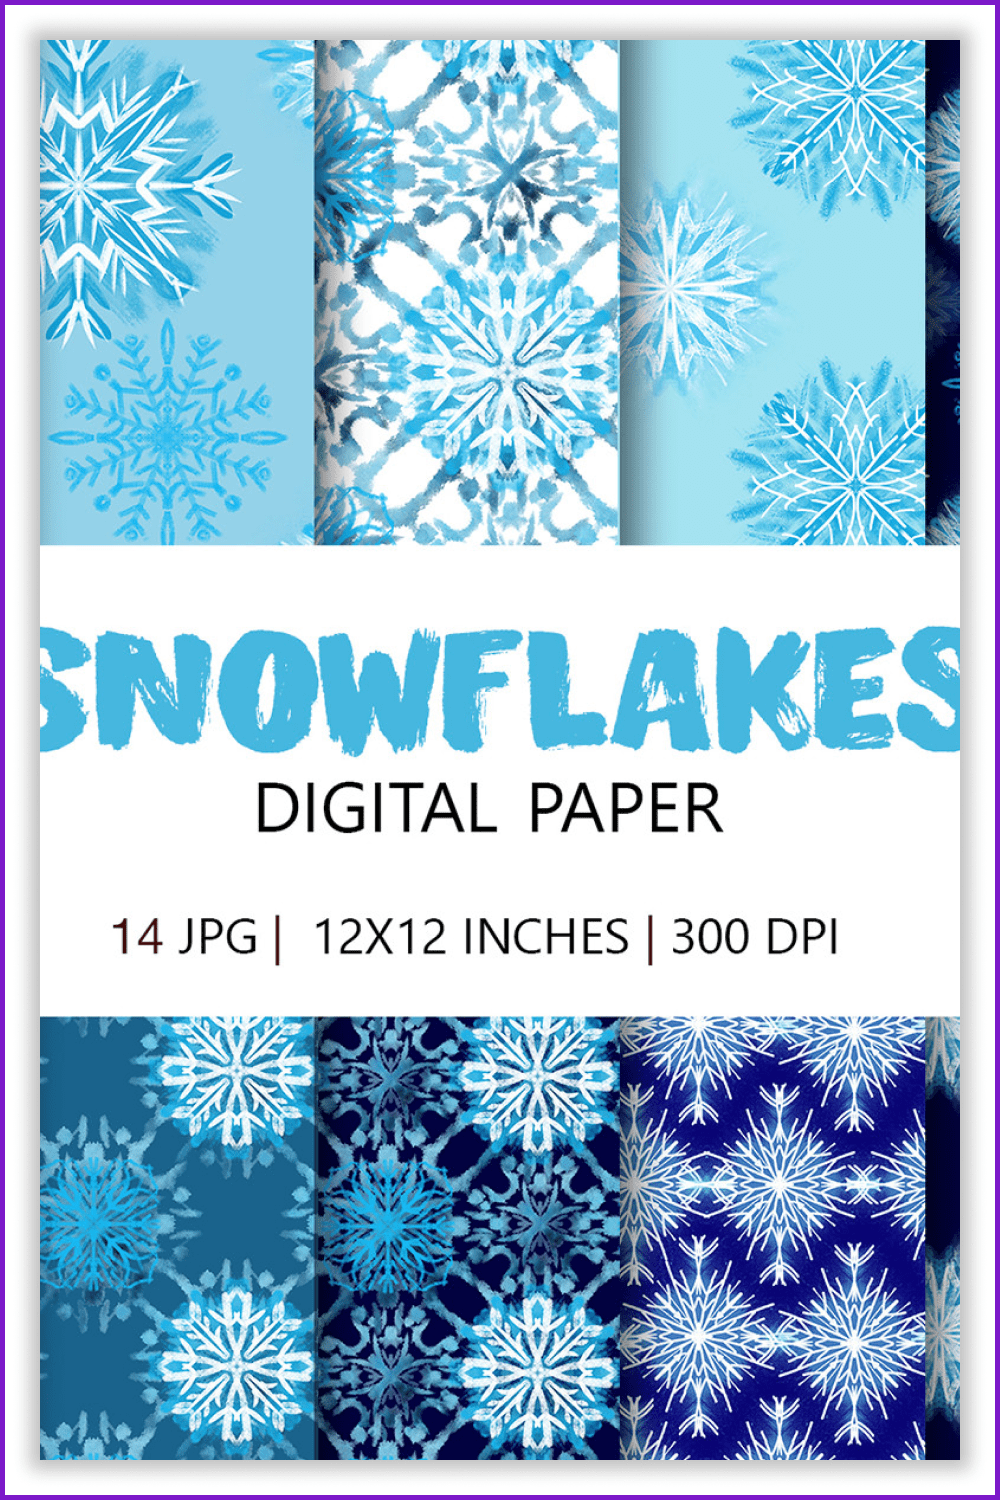 Collage of snowflakes on blue backgrounds.